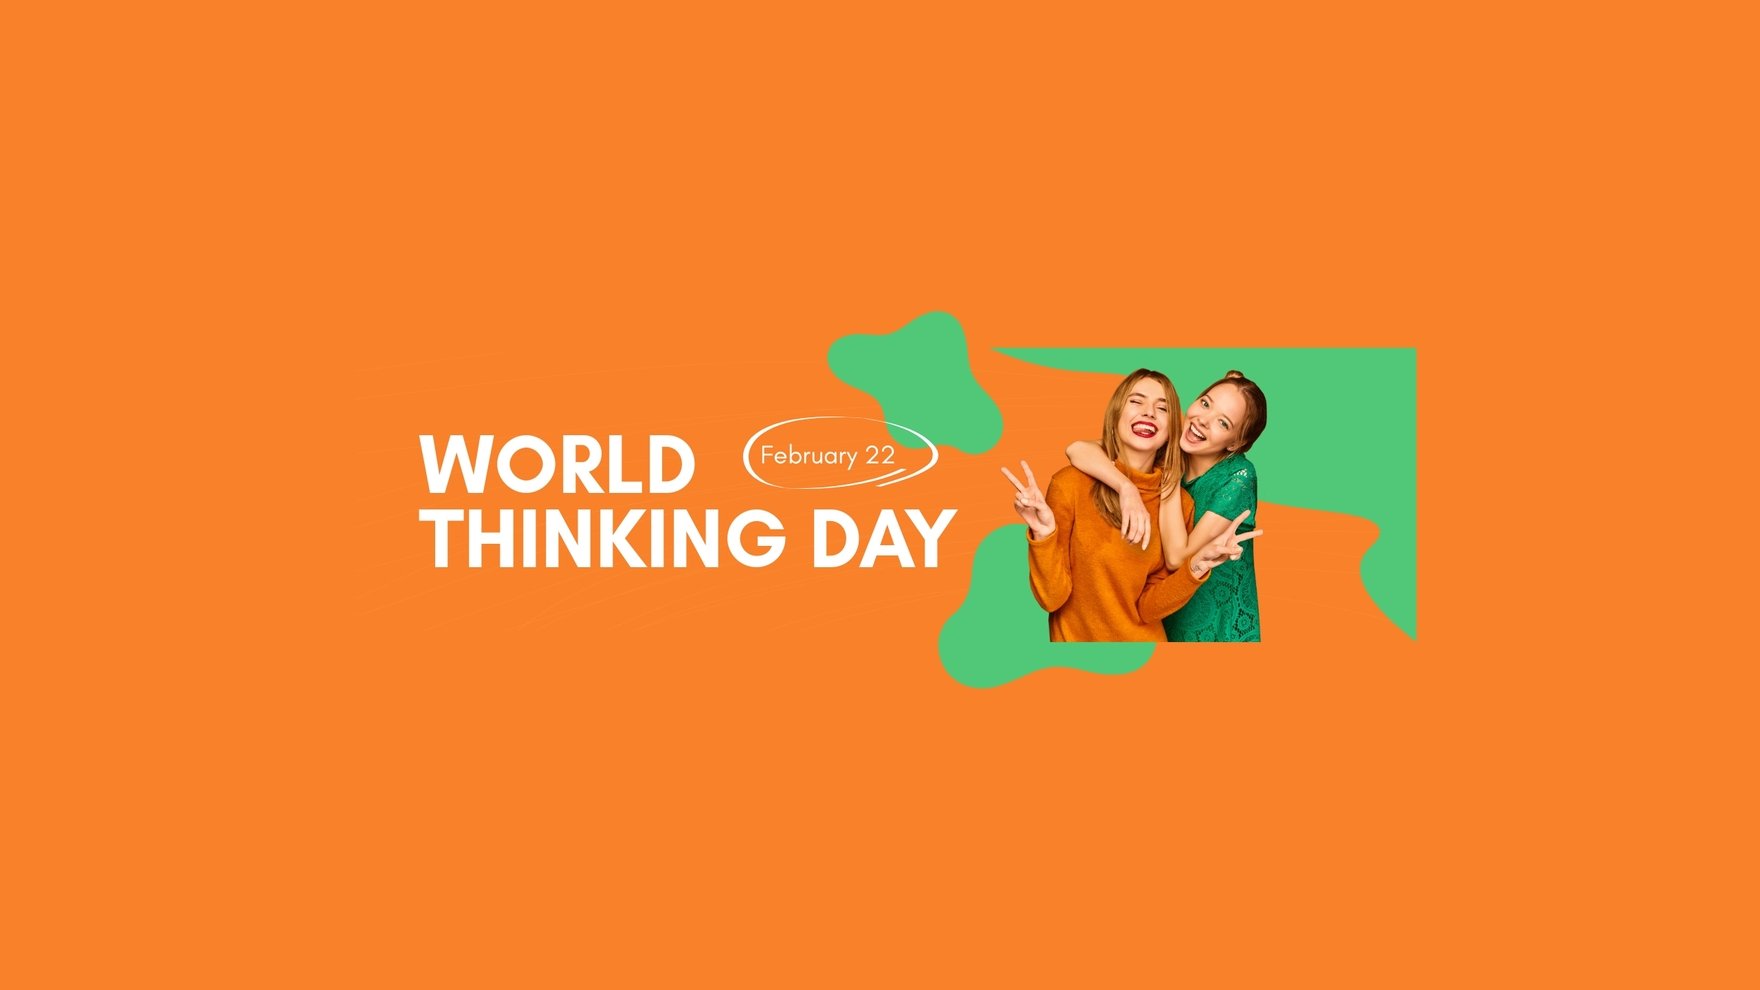 World Thinking Day Youtube Banner Template